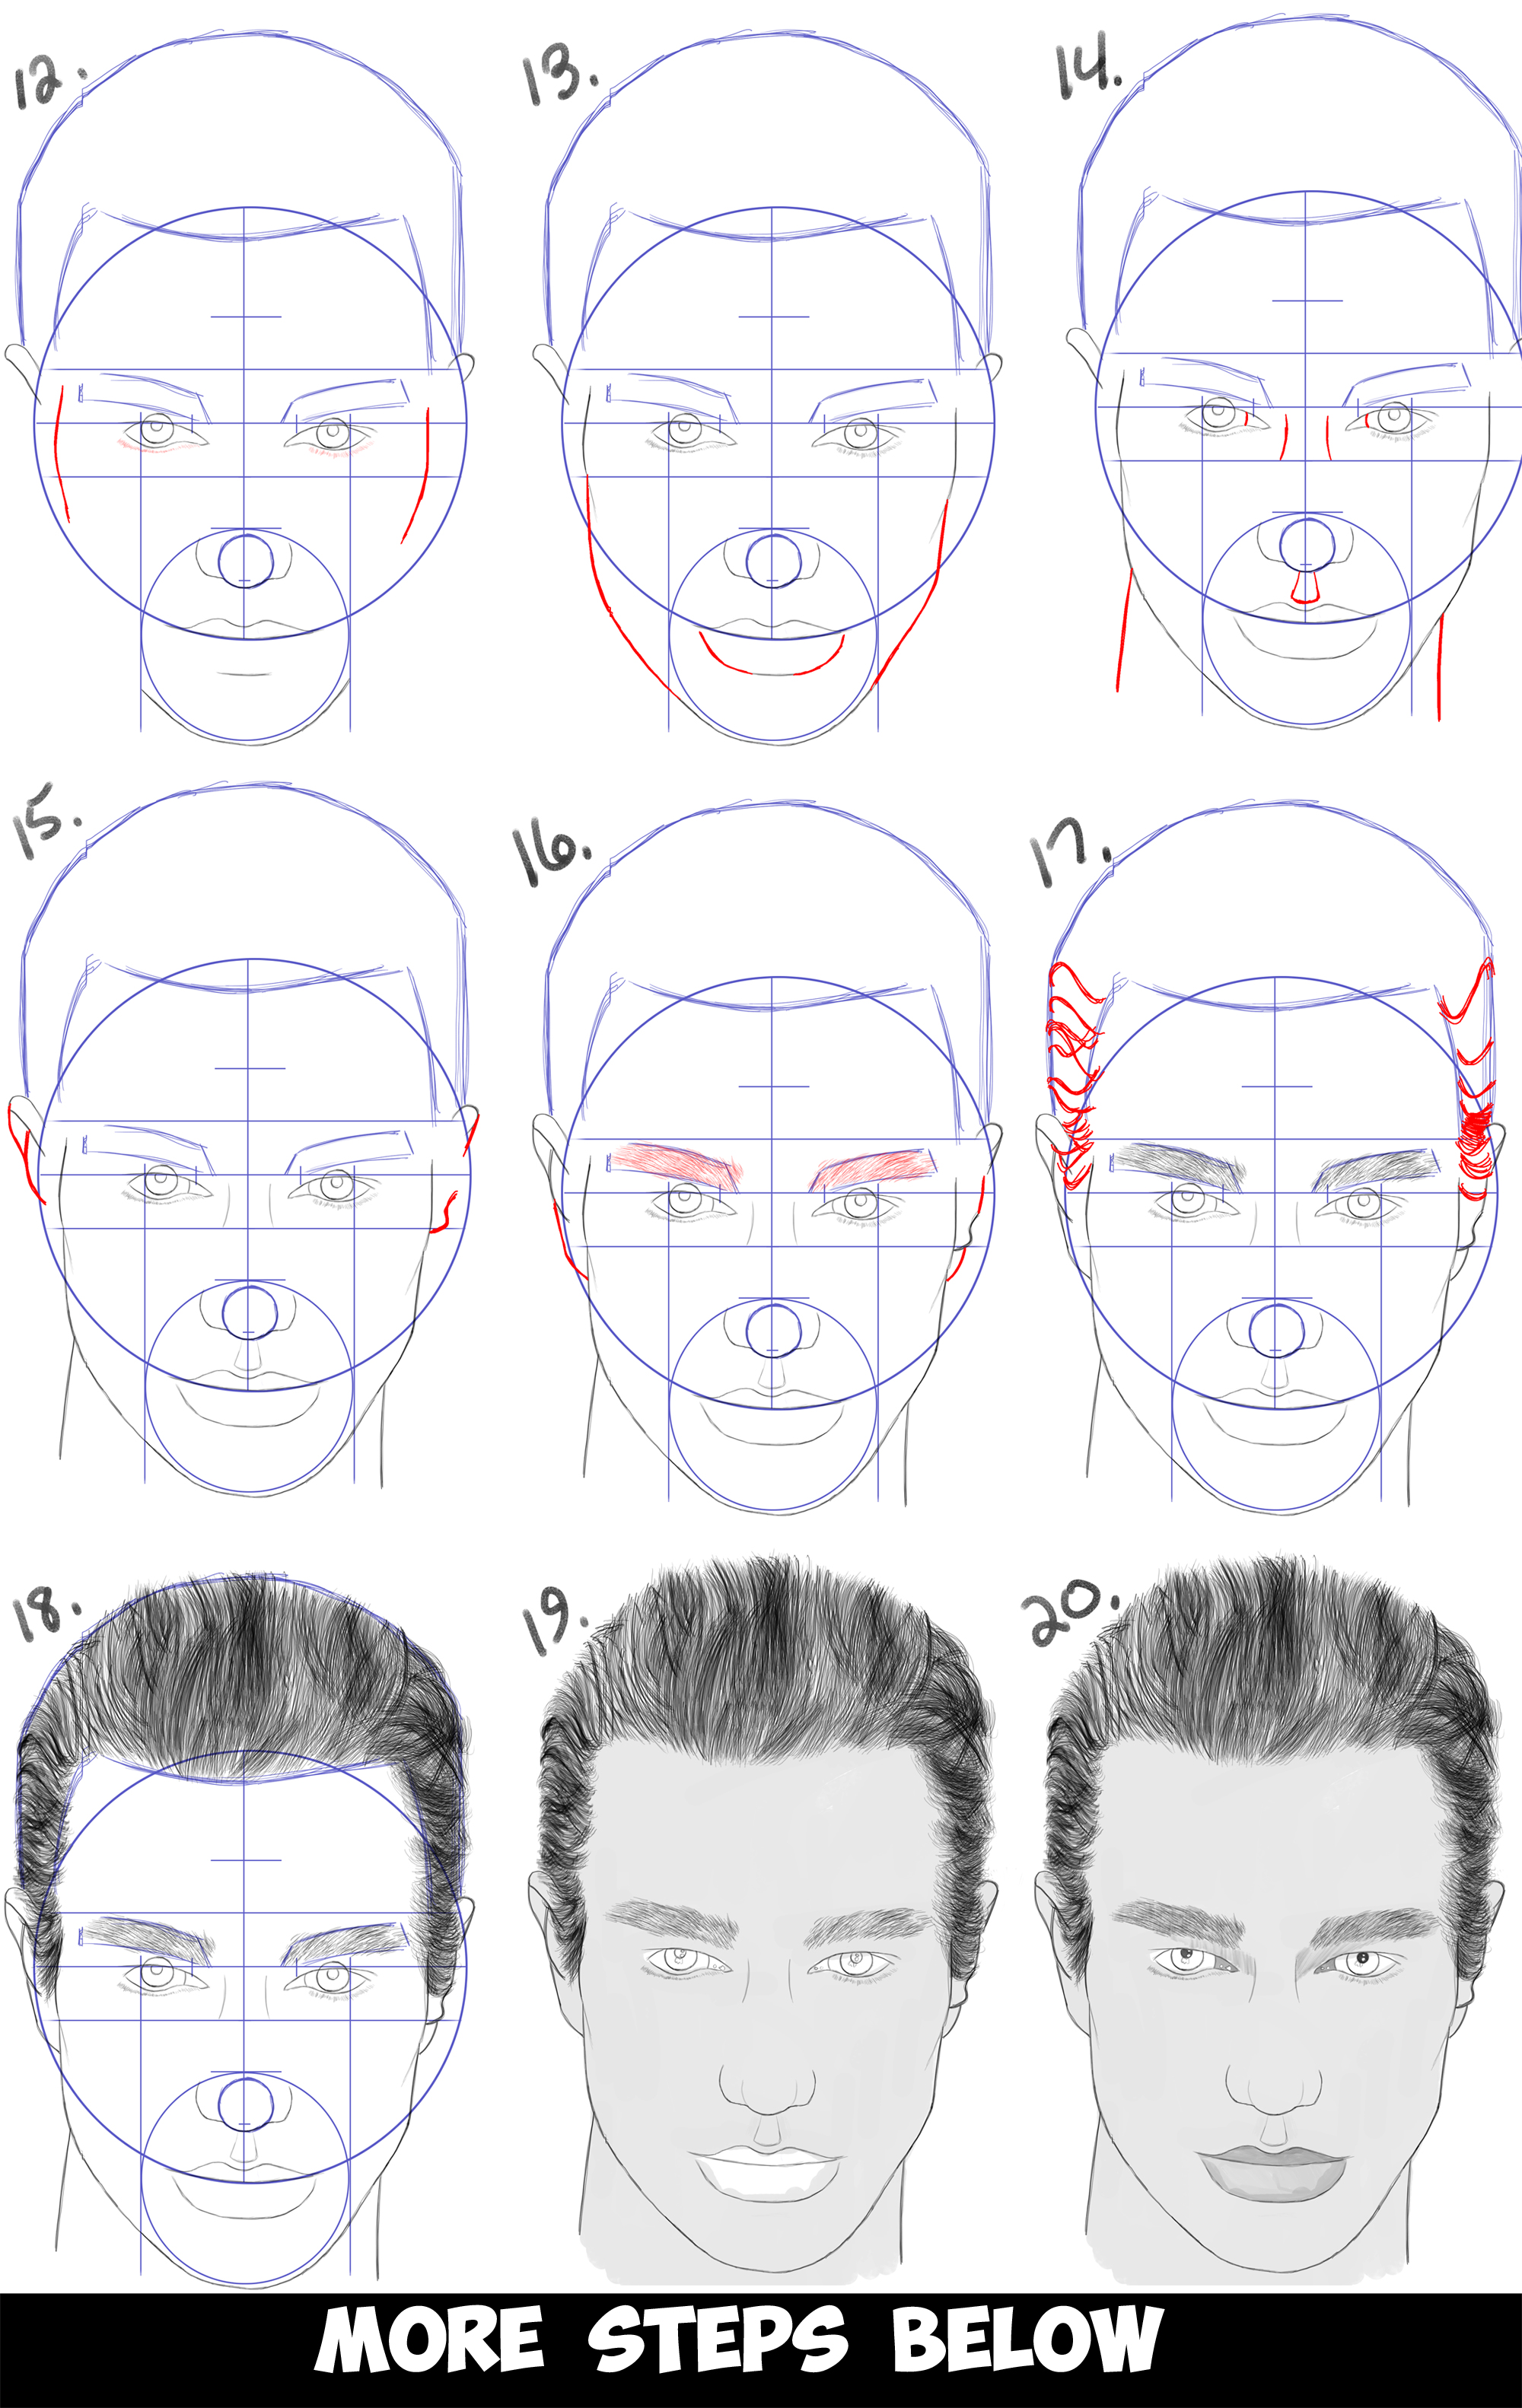 How to Draw a Man's Face from the Front View (Male) Easy Step by Step